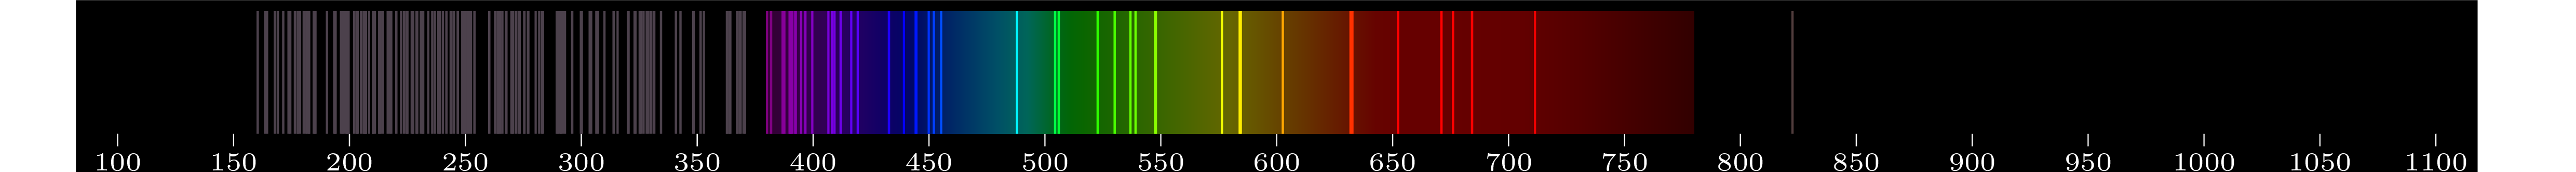 emmision spectra of element Pt